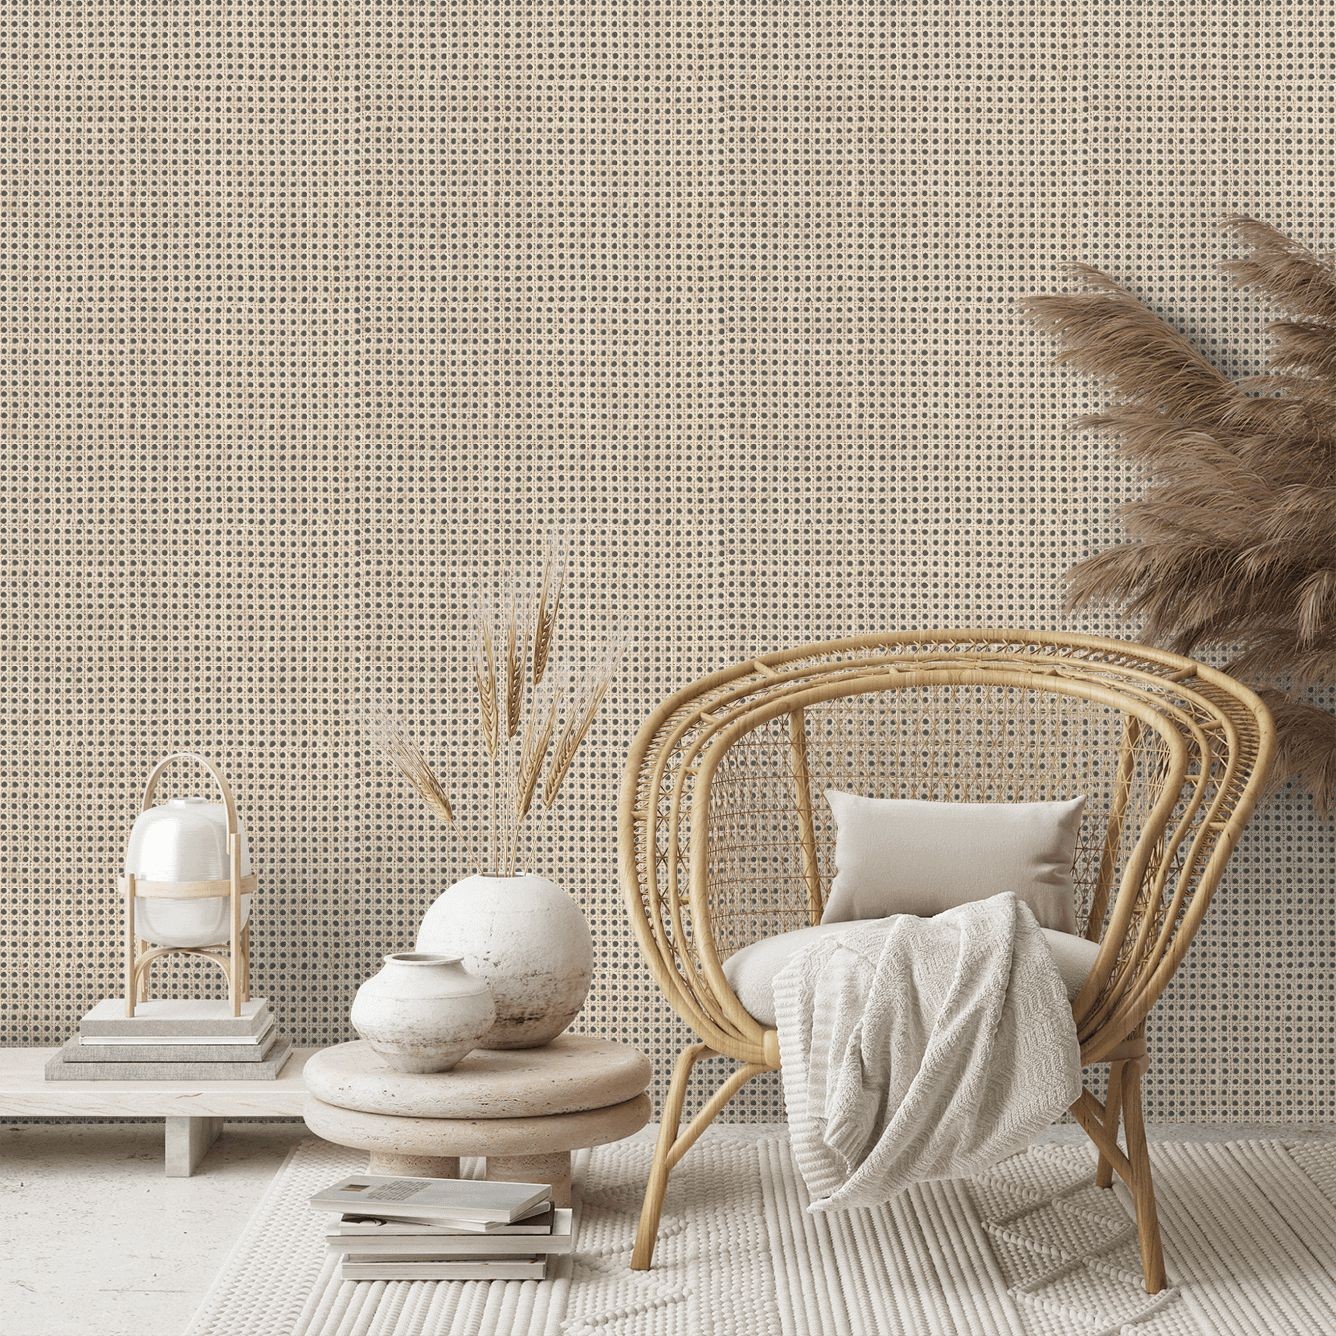 French rattan | wallpaper design | Excel Wall Covering